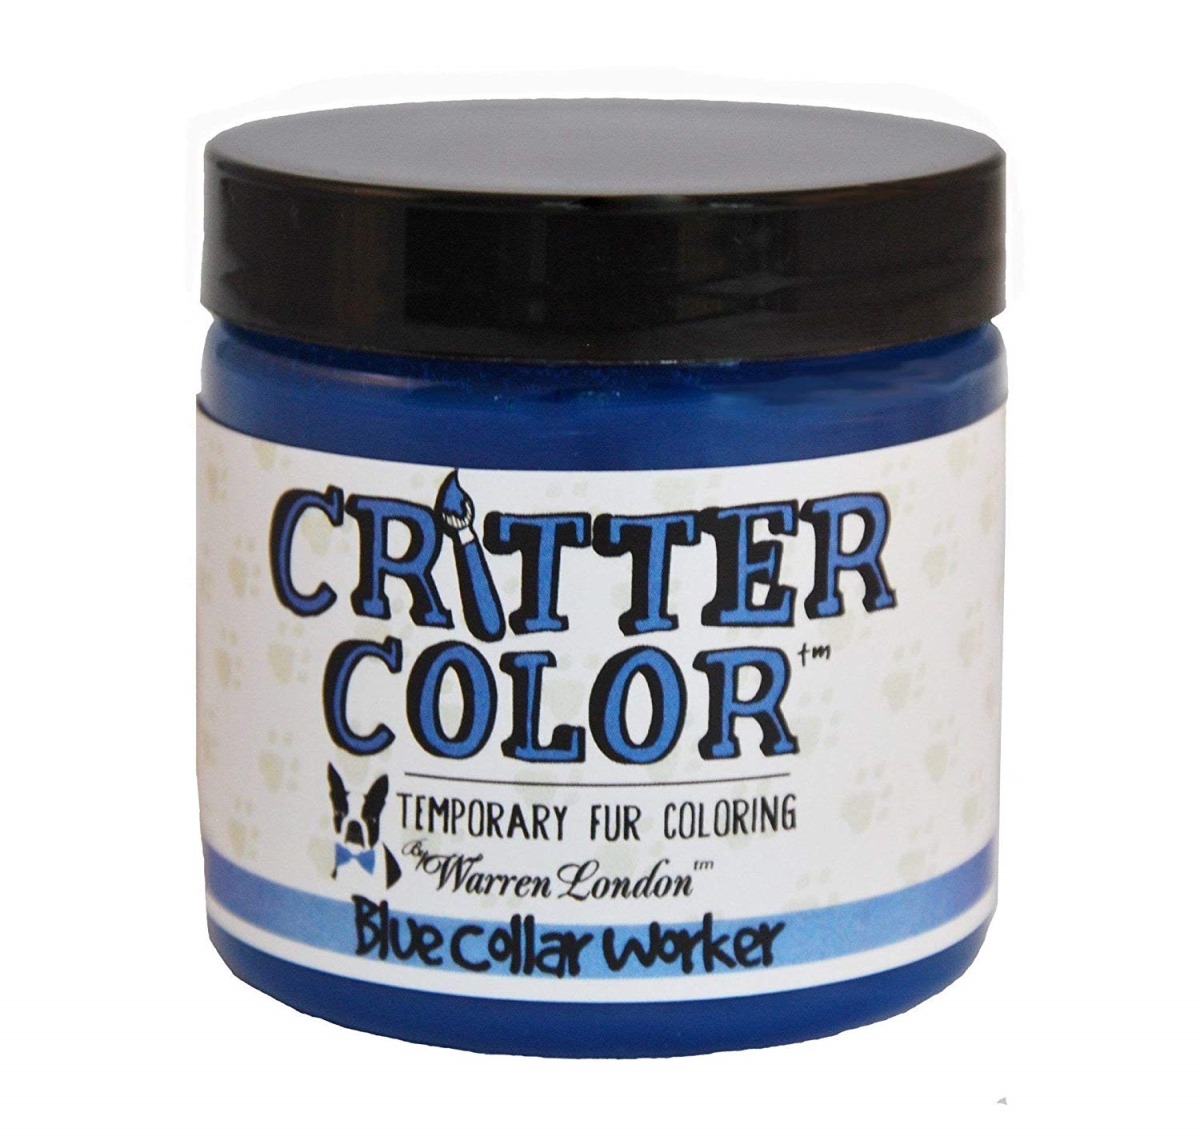 101804 Critter Color Temporary Fur Coloring For Dogs - Blue Collar Worker